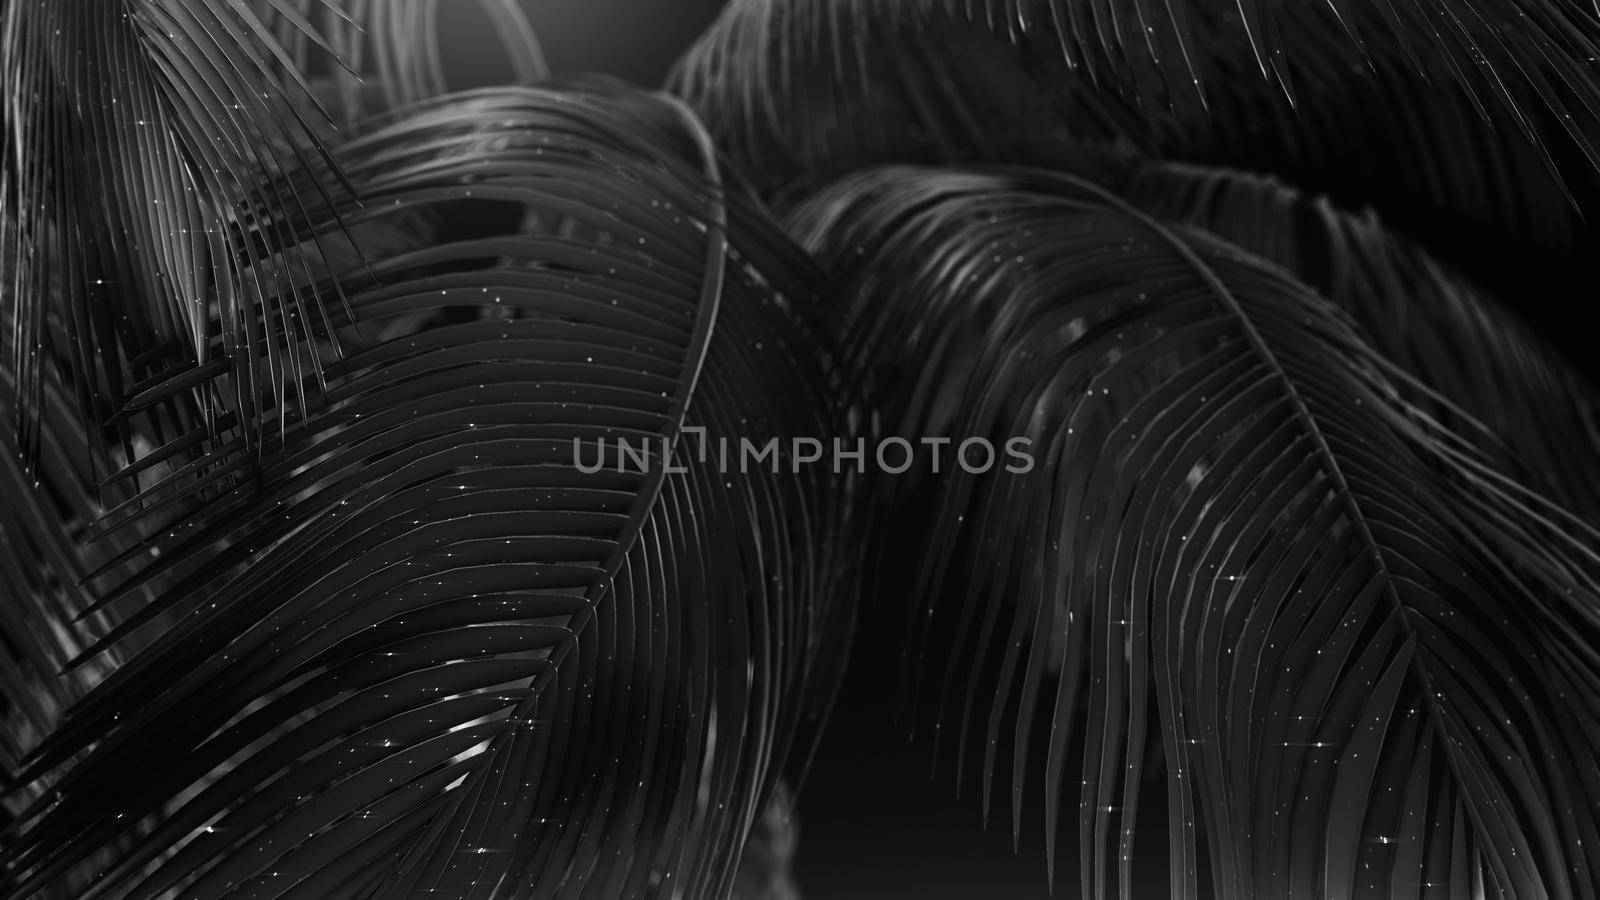 3D rendering Black abstract palms with glitter 4k